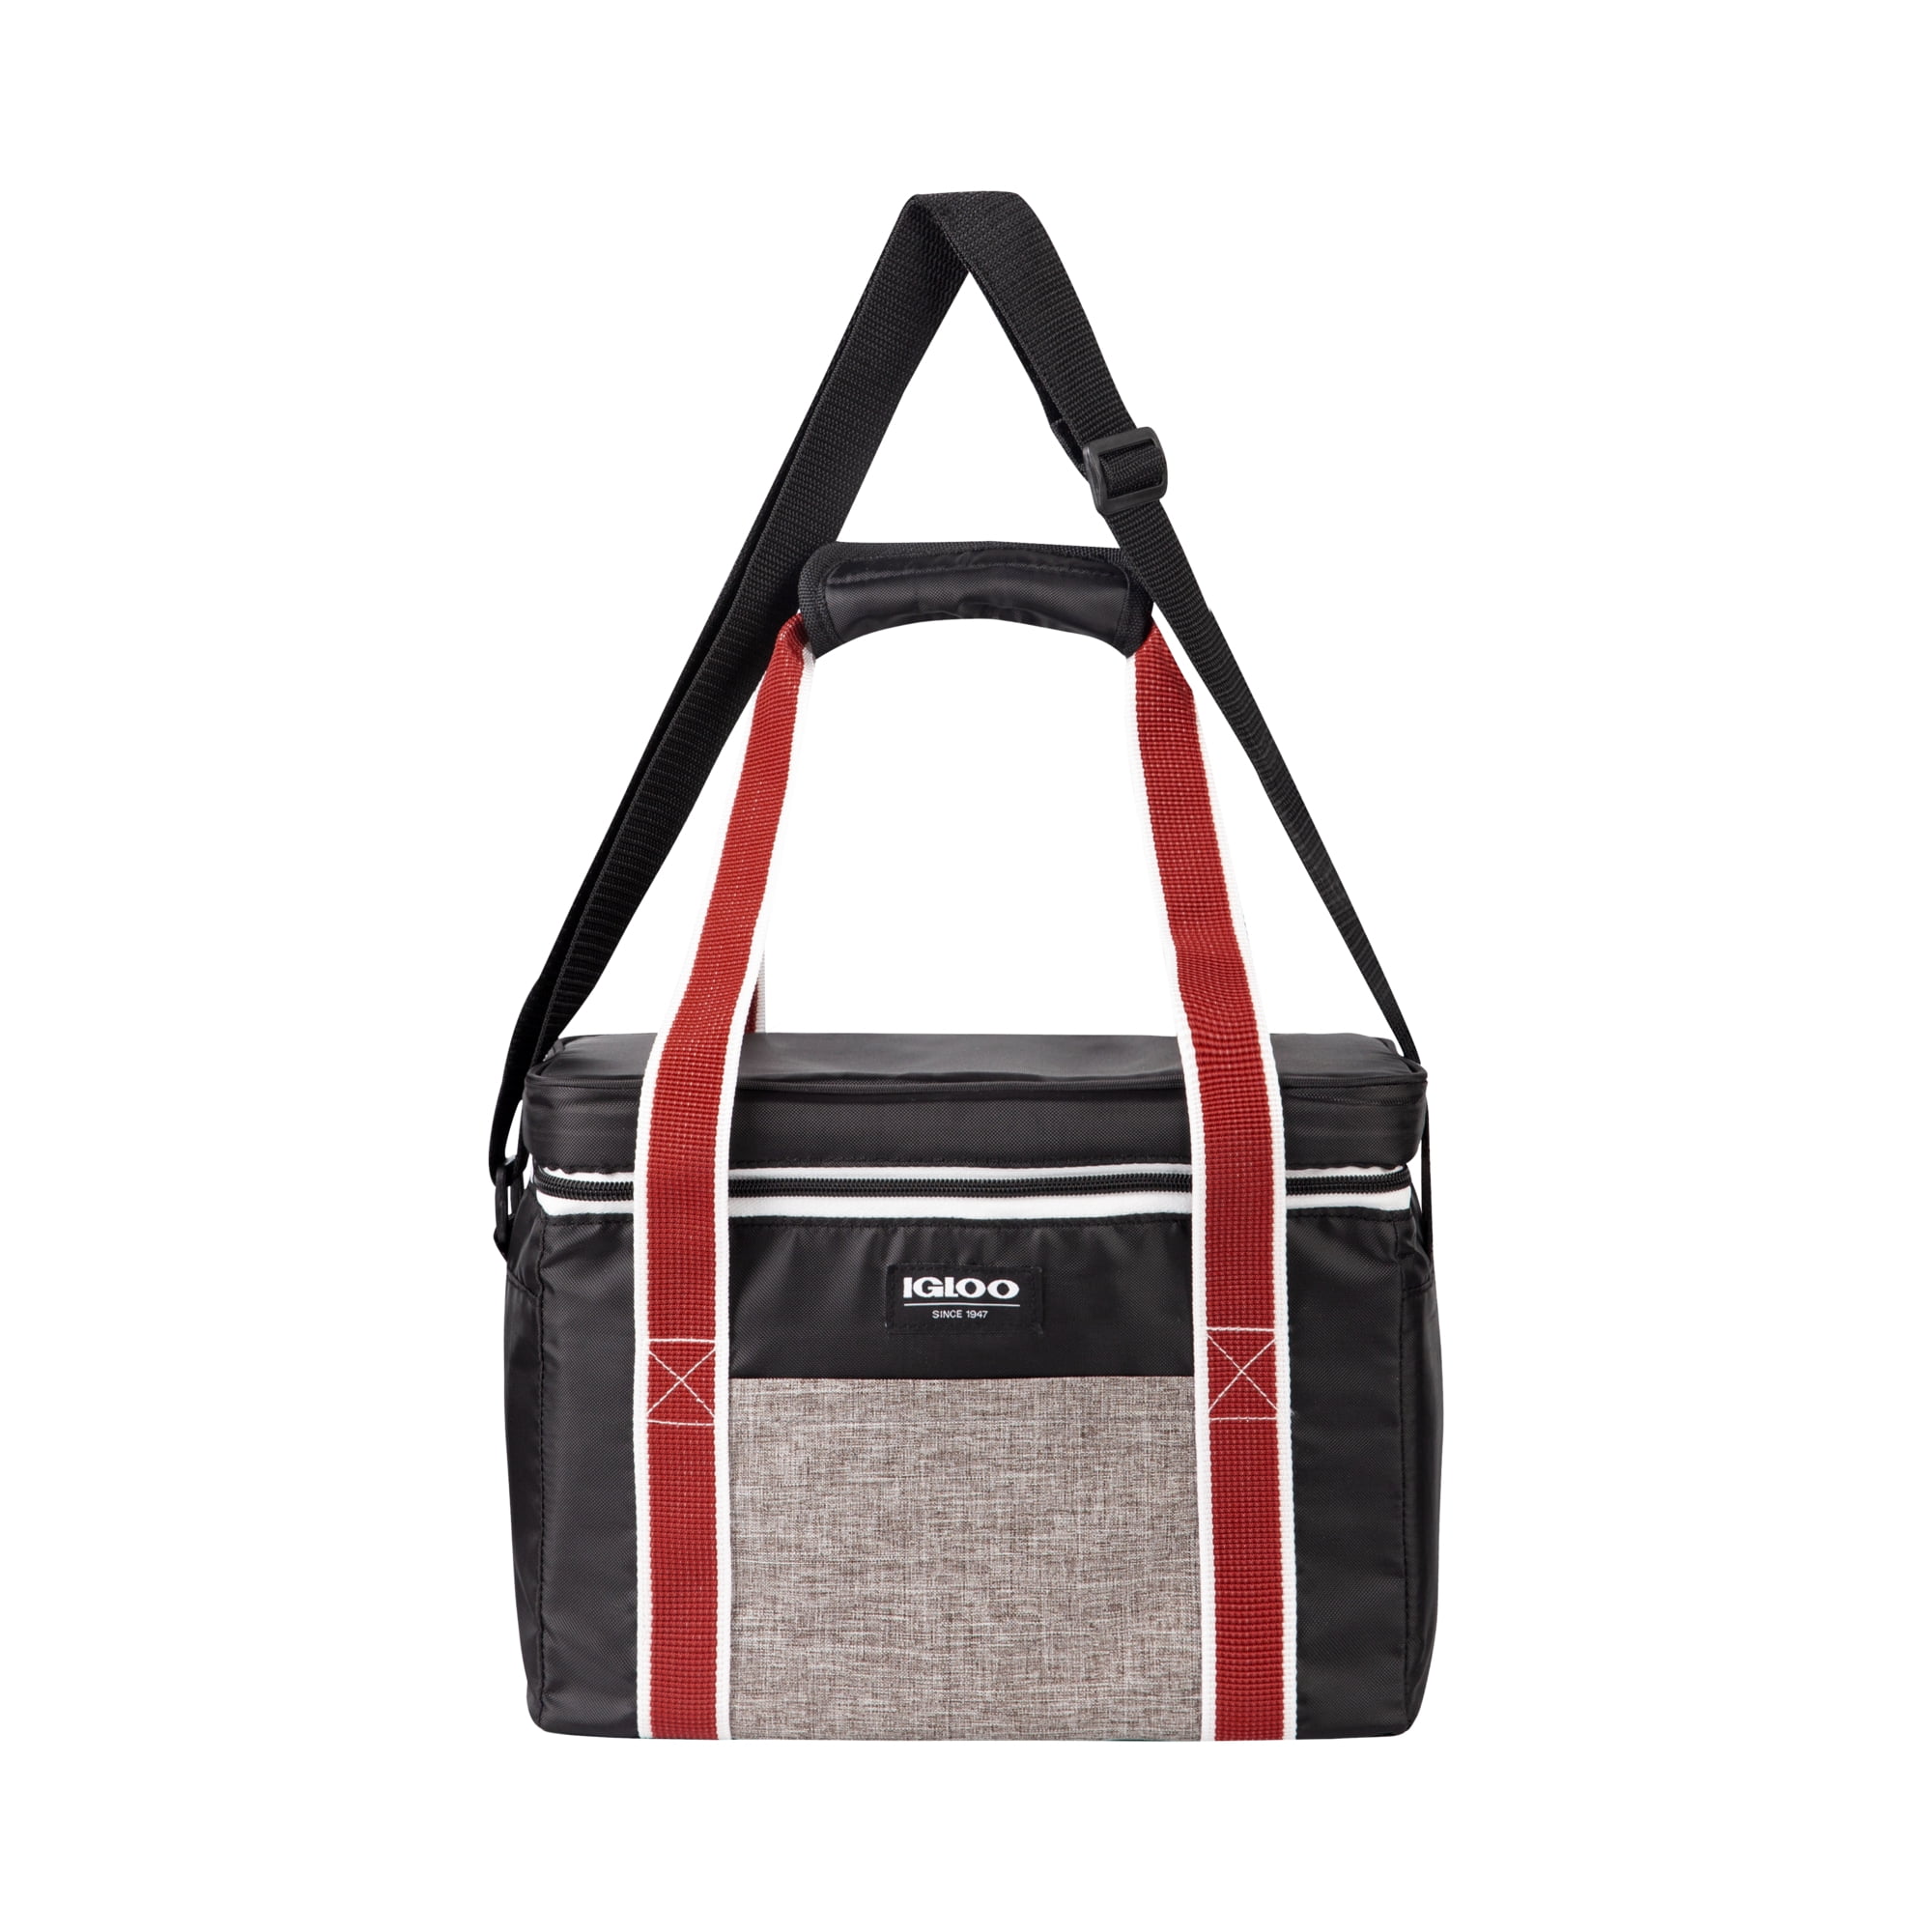 Igloo 9 Can Balance Mini City Cooler Lunch Tote- Gray/Black